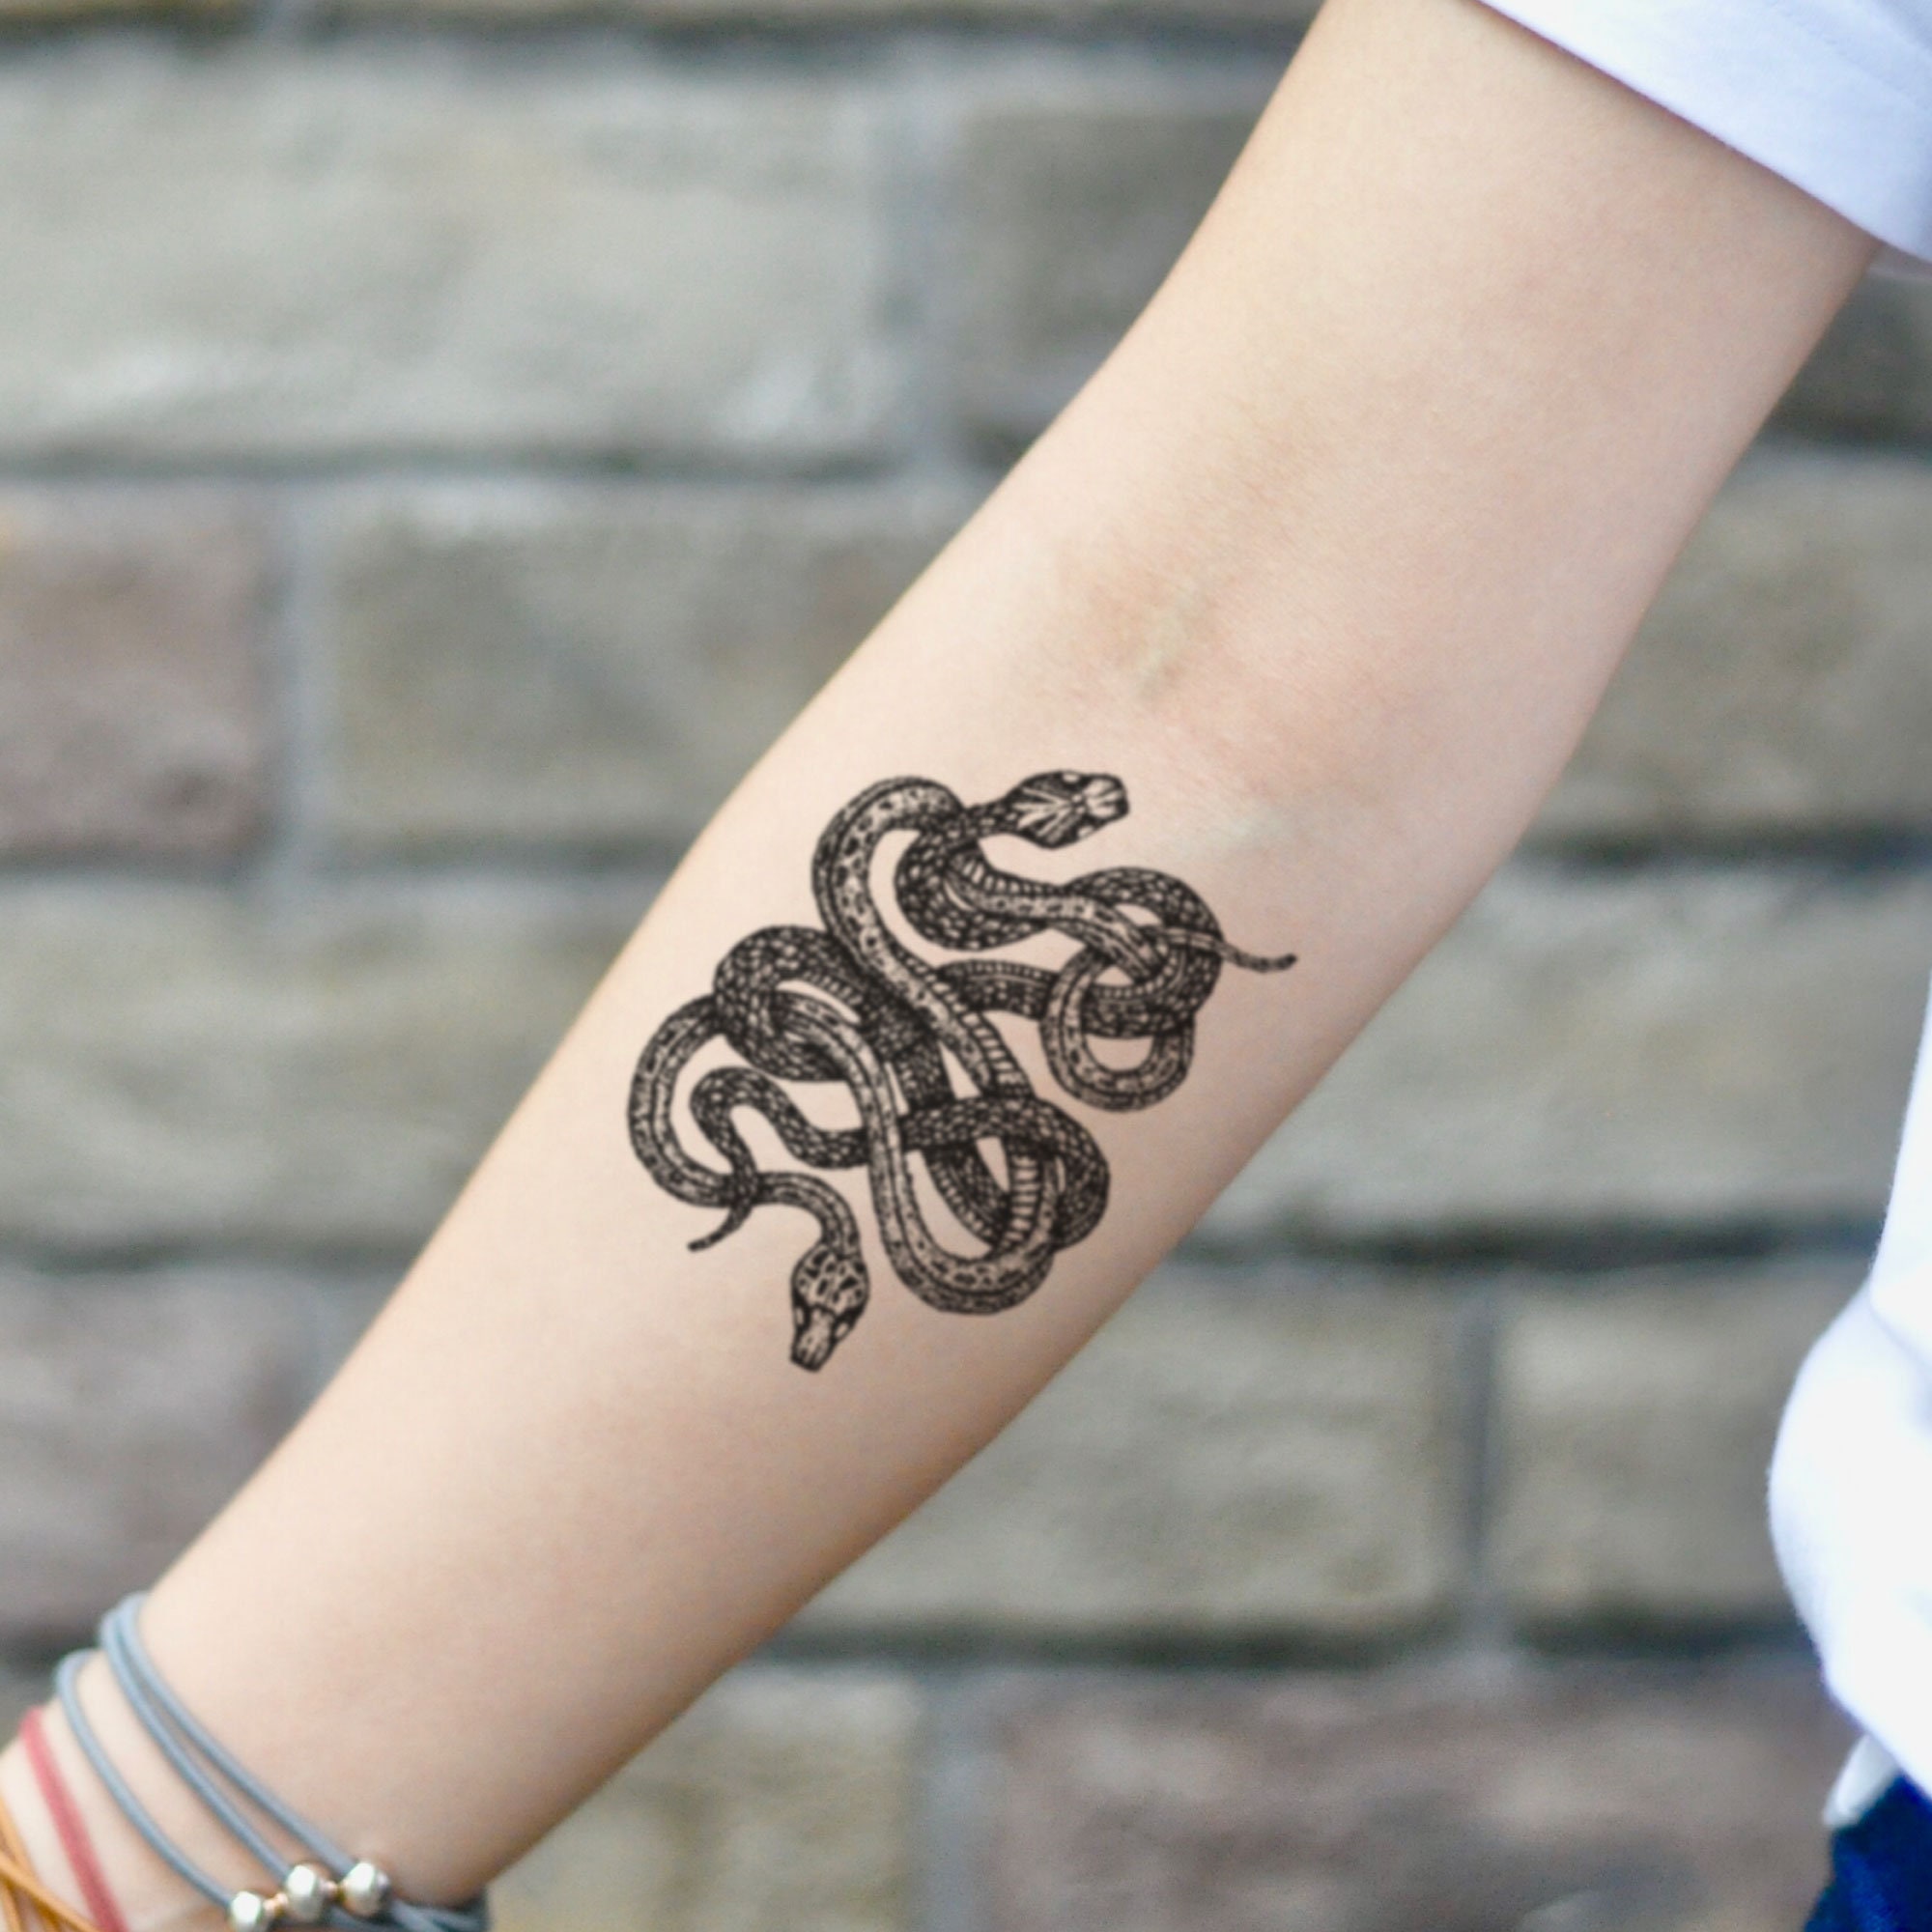 Two Headed Snake done by Marqui Watling at Higher Love : r/tattoo